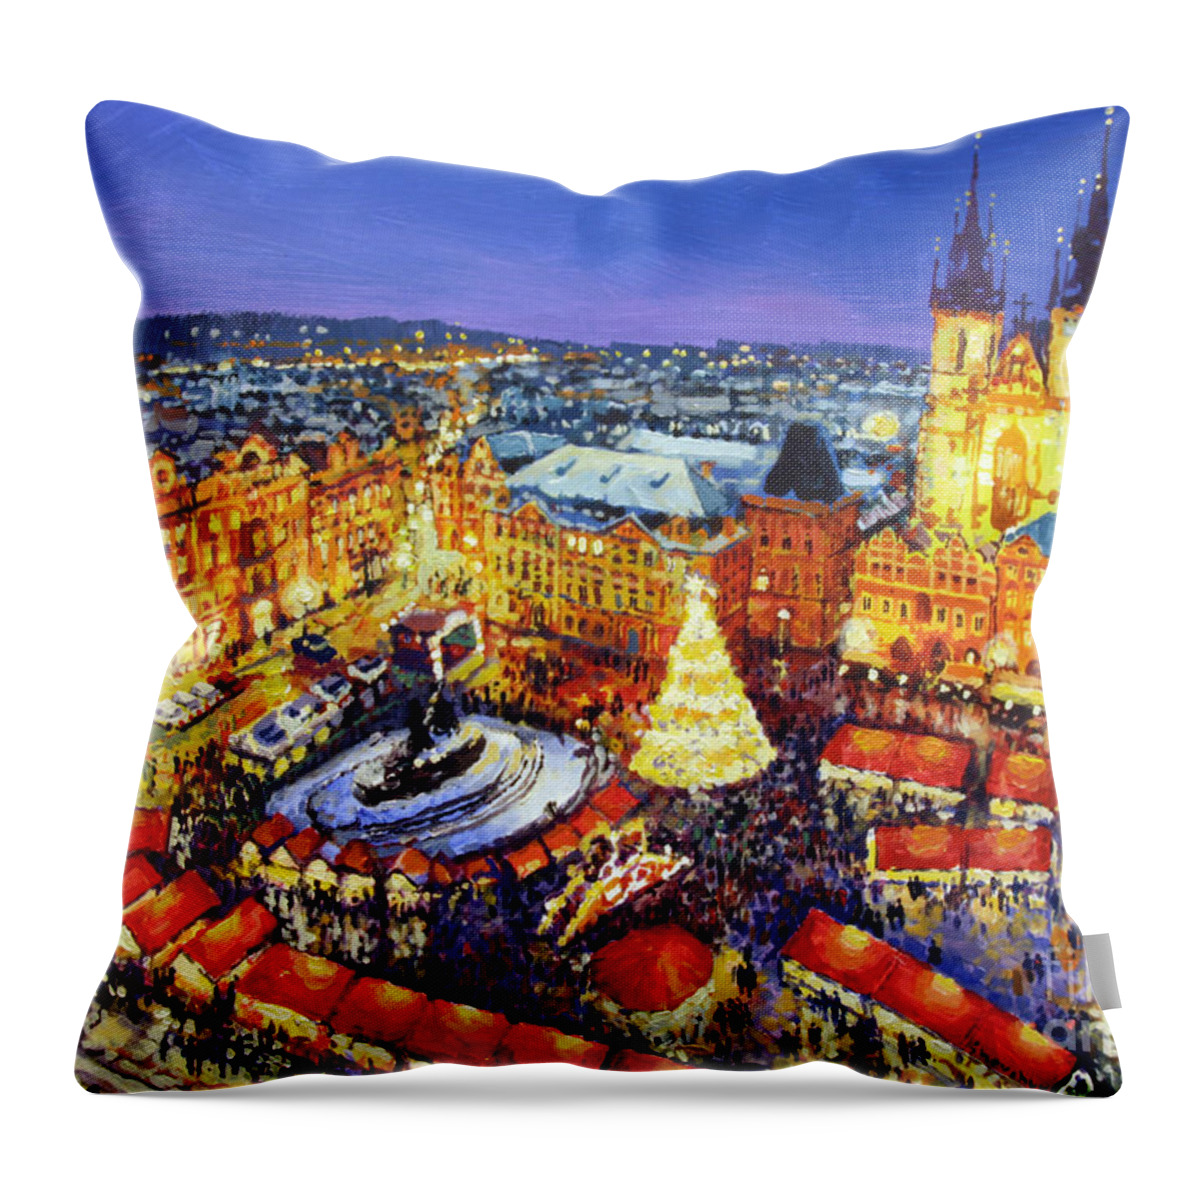 Acrilic Throw Pillow featuring the painting Prague Old Town Square Christmas Market 2014 by Yuriy Shevchuk